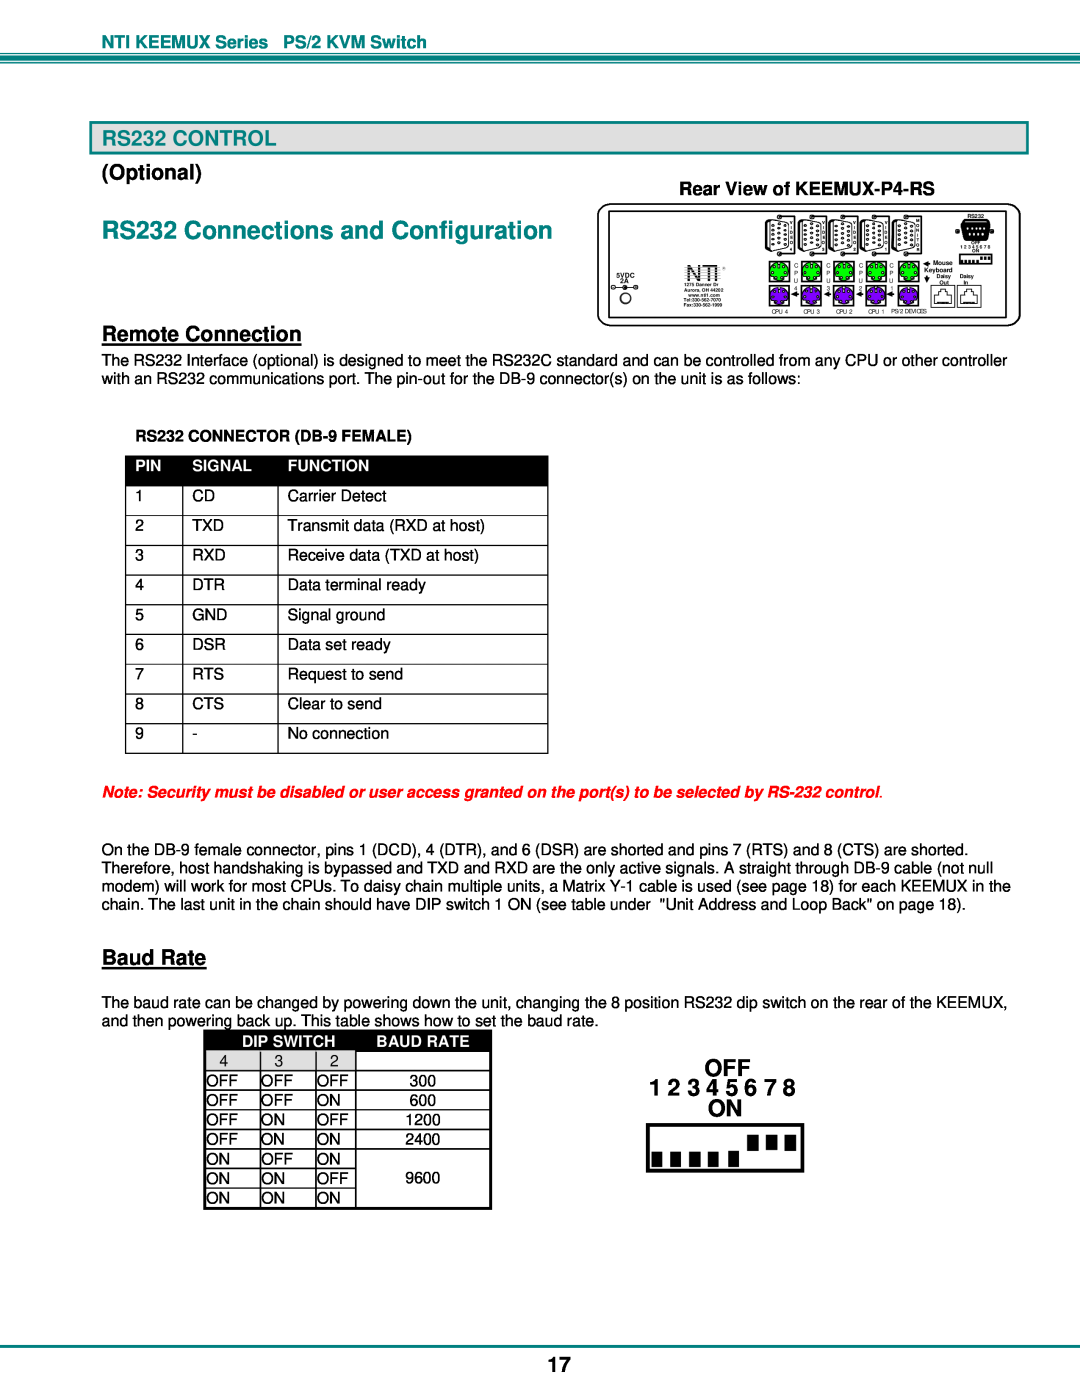 Network Technologies KEEMUX-Px RS232 Connections and Configuration, RS232 CONTROL, Remote Connection, Baud Rate, Signal 